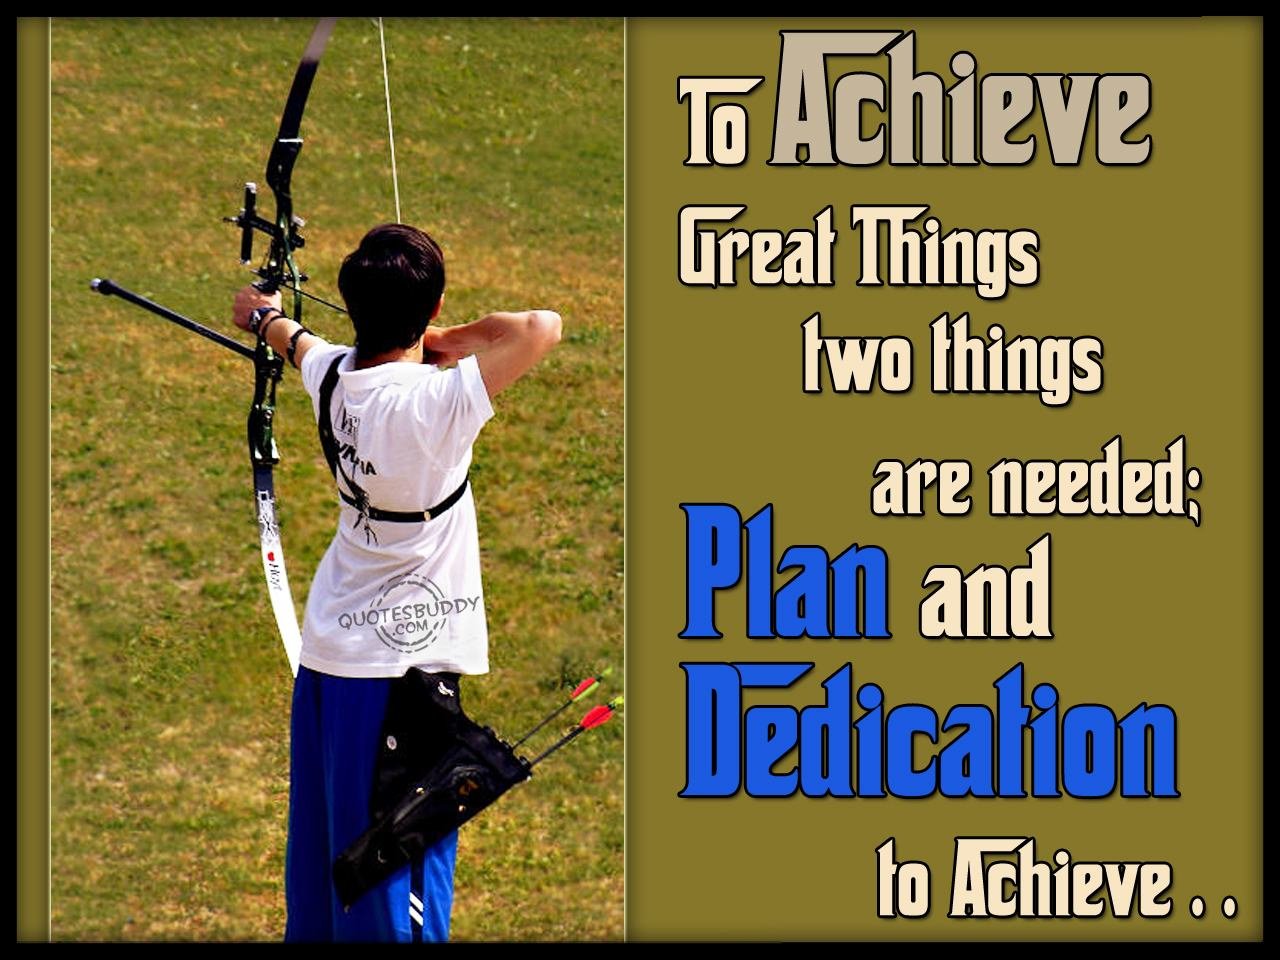 To achieve great things two things are needed plan and dedication to achieve.